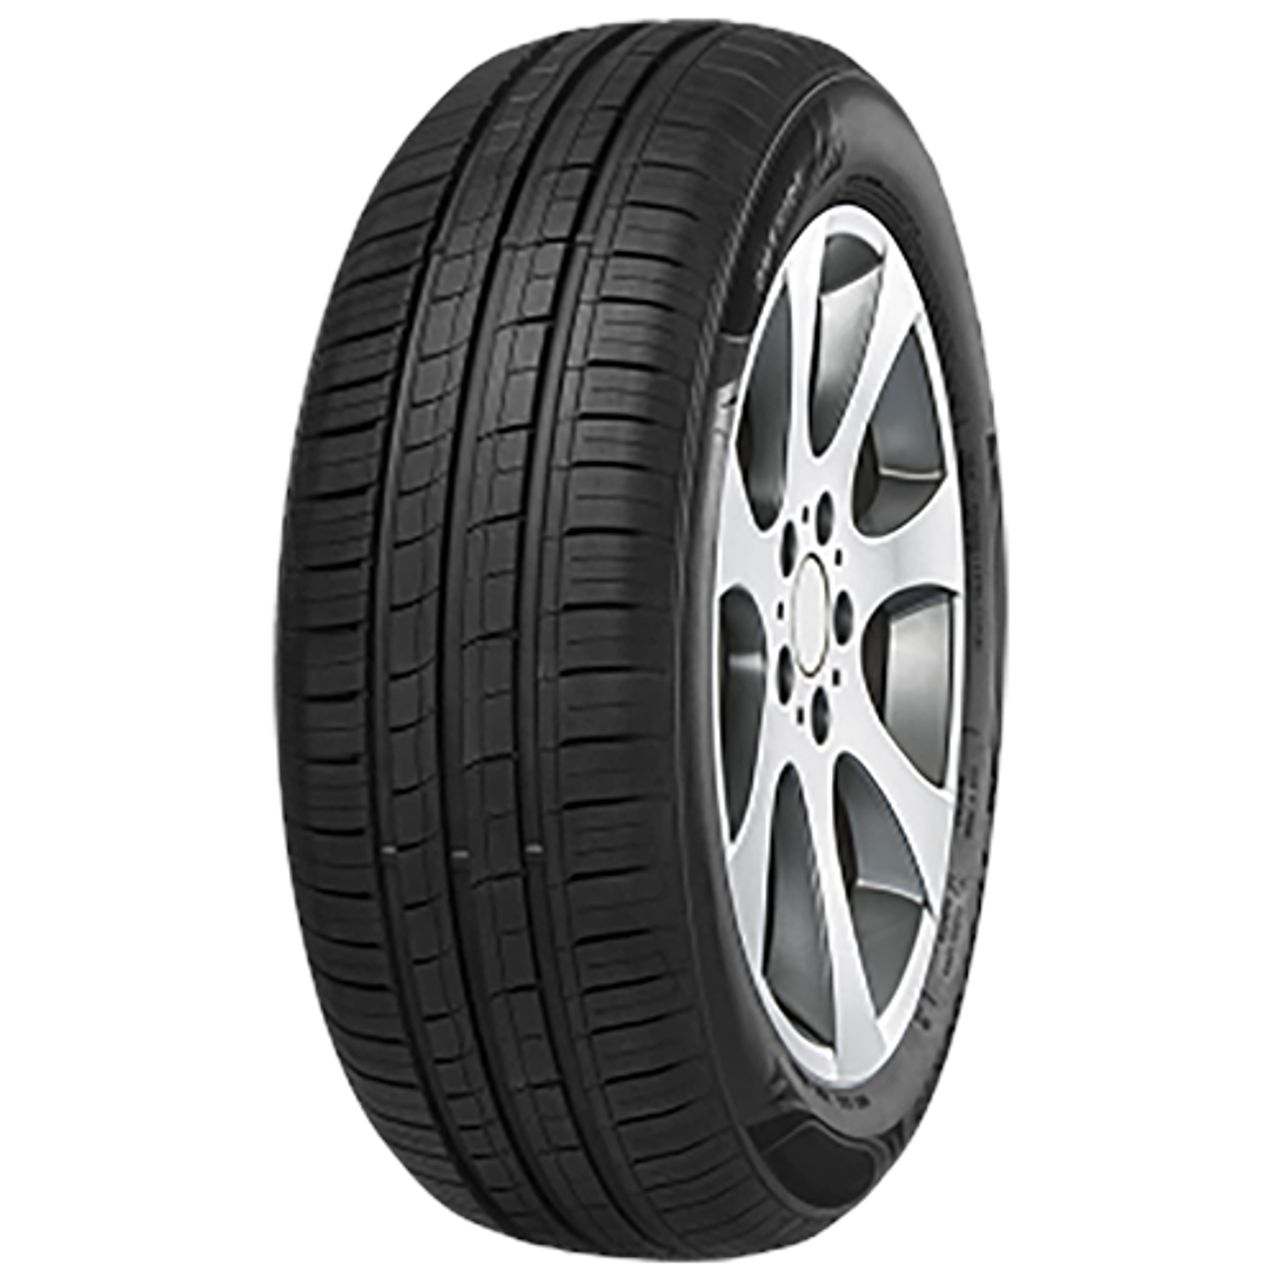 IMPERIAL ECODRIVER 4 135/80R13 70T BSW